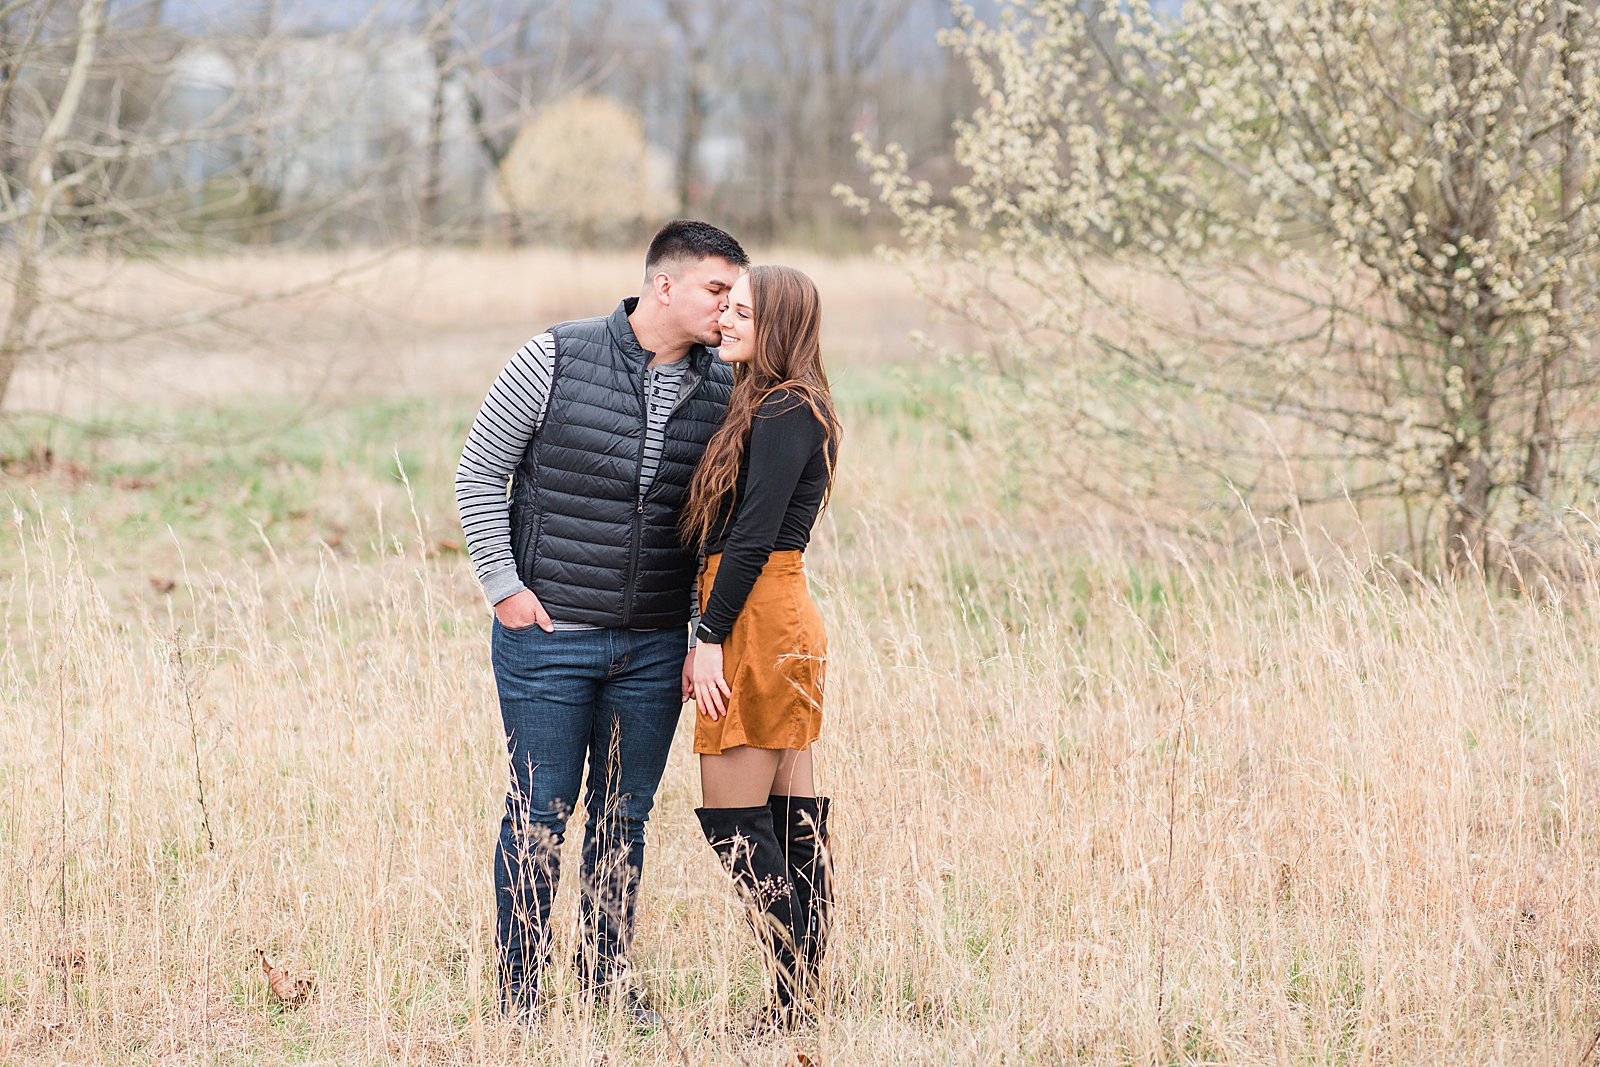 Andrews NC Spring Session Spencer kissing Erin on the cheek in field Photo